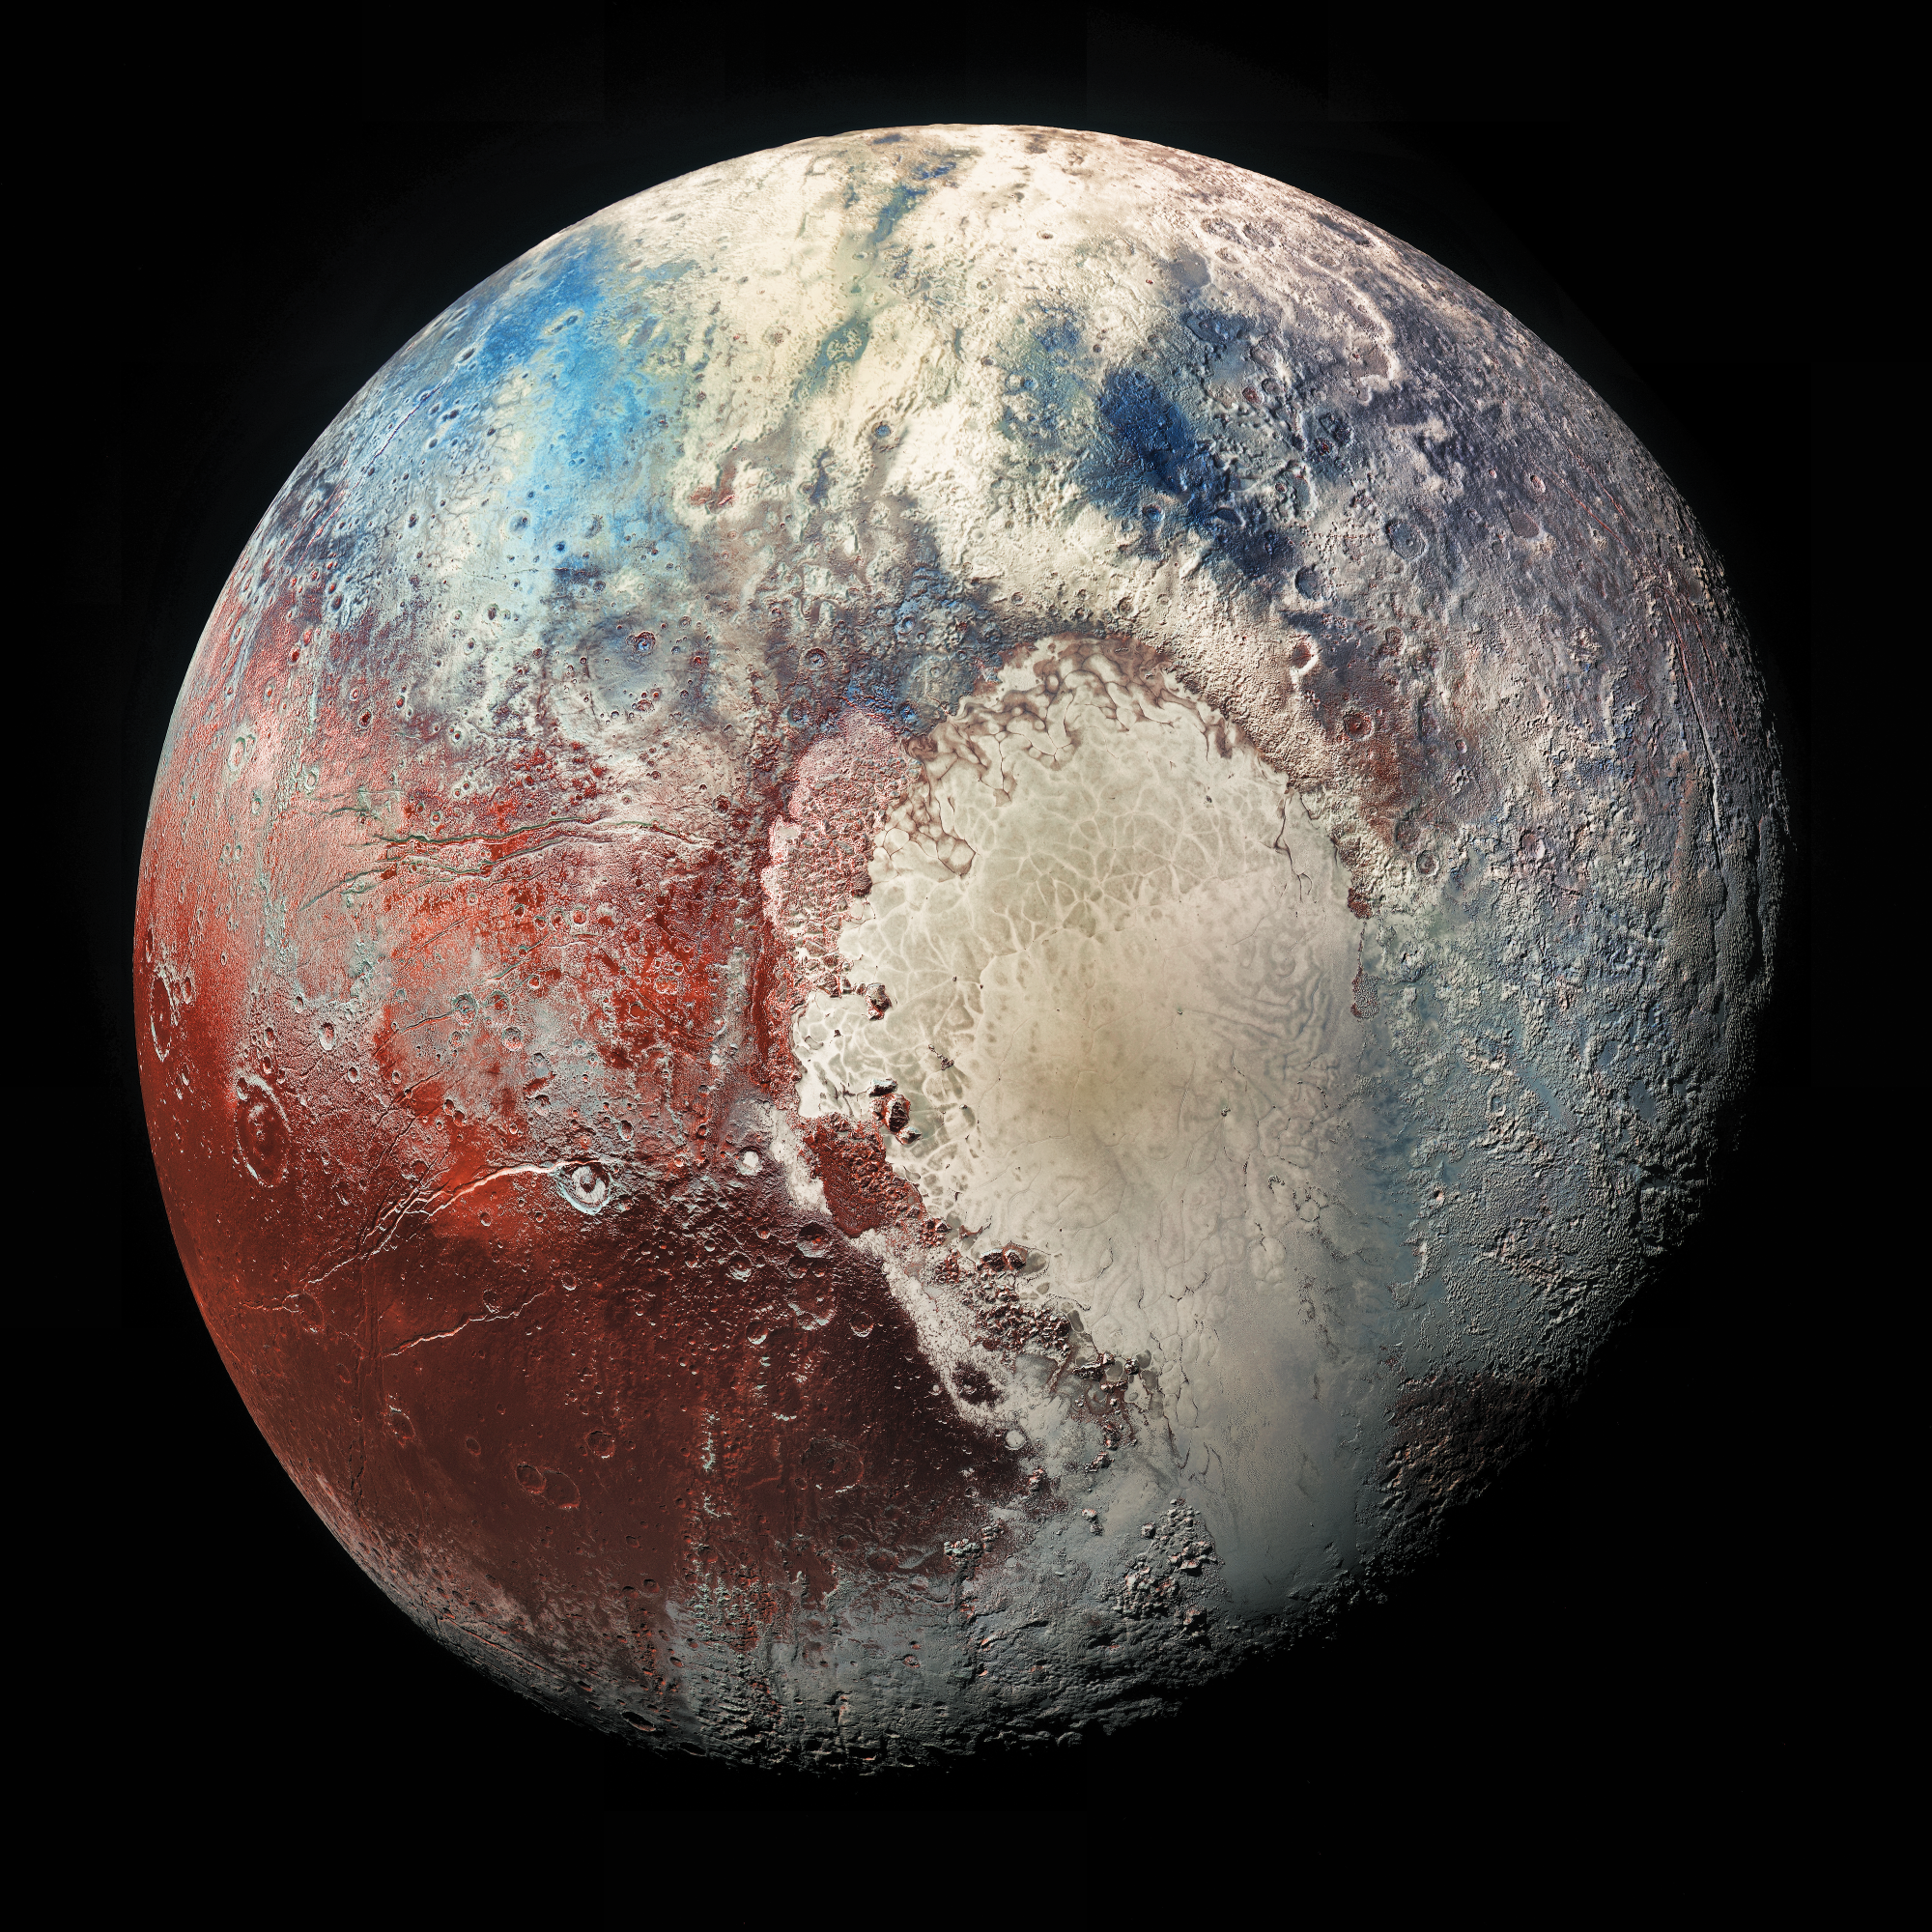 pluto in space